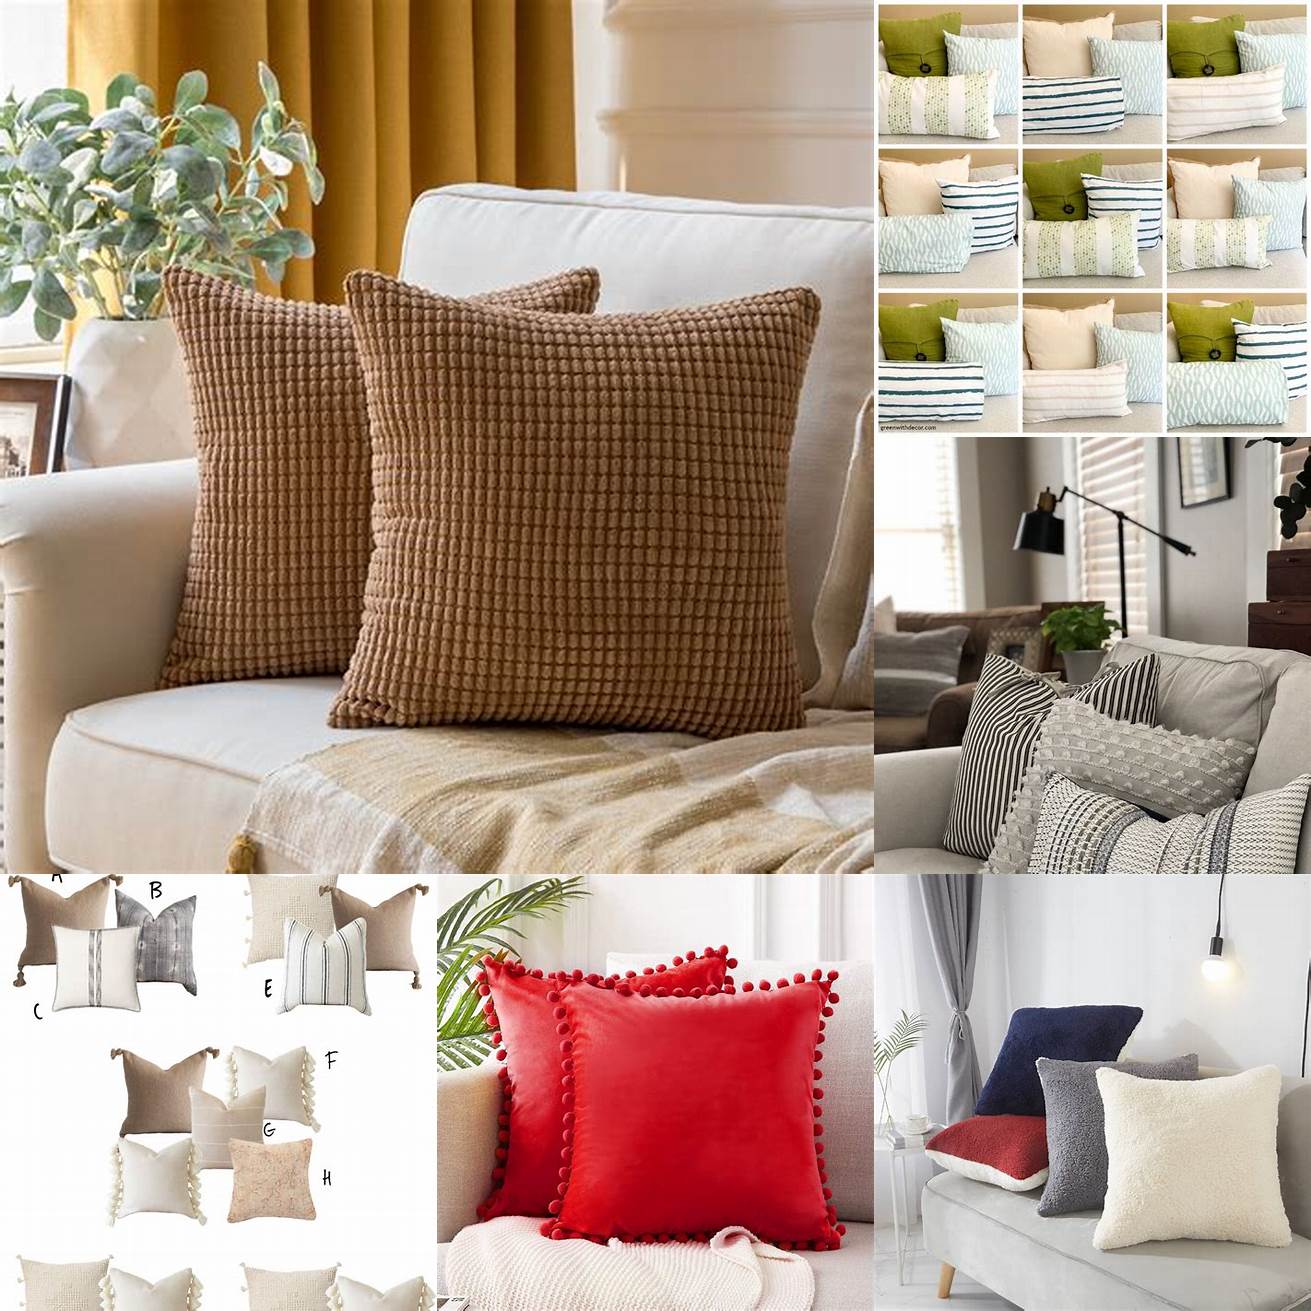 Pillows and throws Soft textures and colorful patterns can add comfort and style to any space